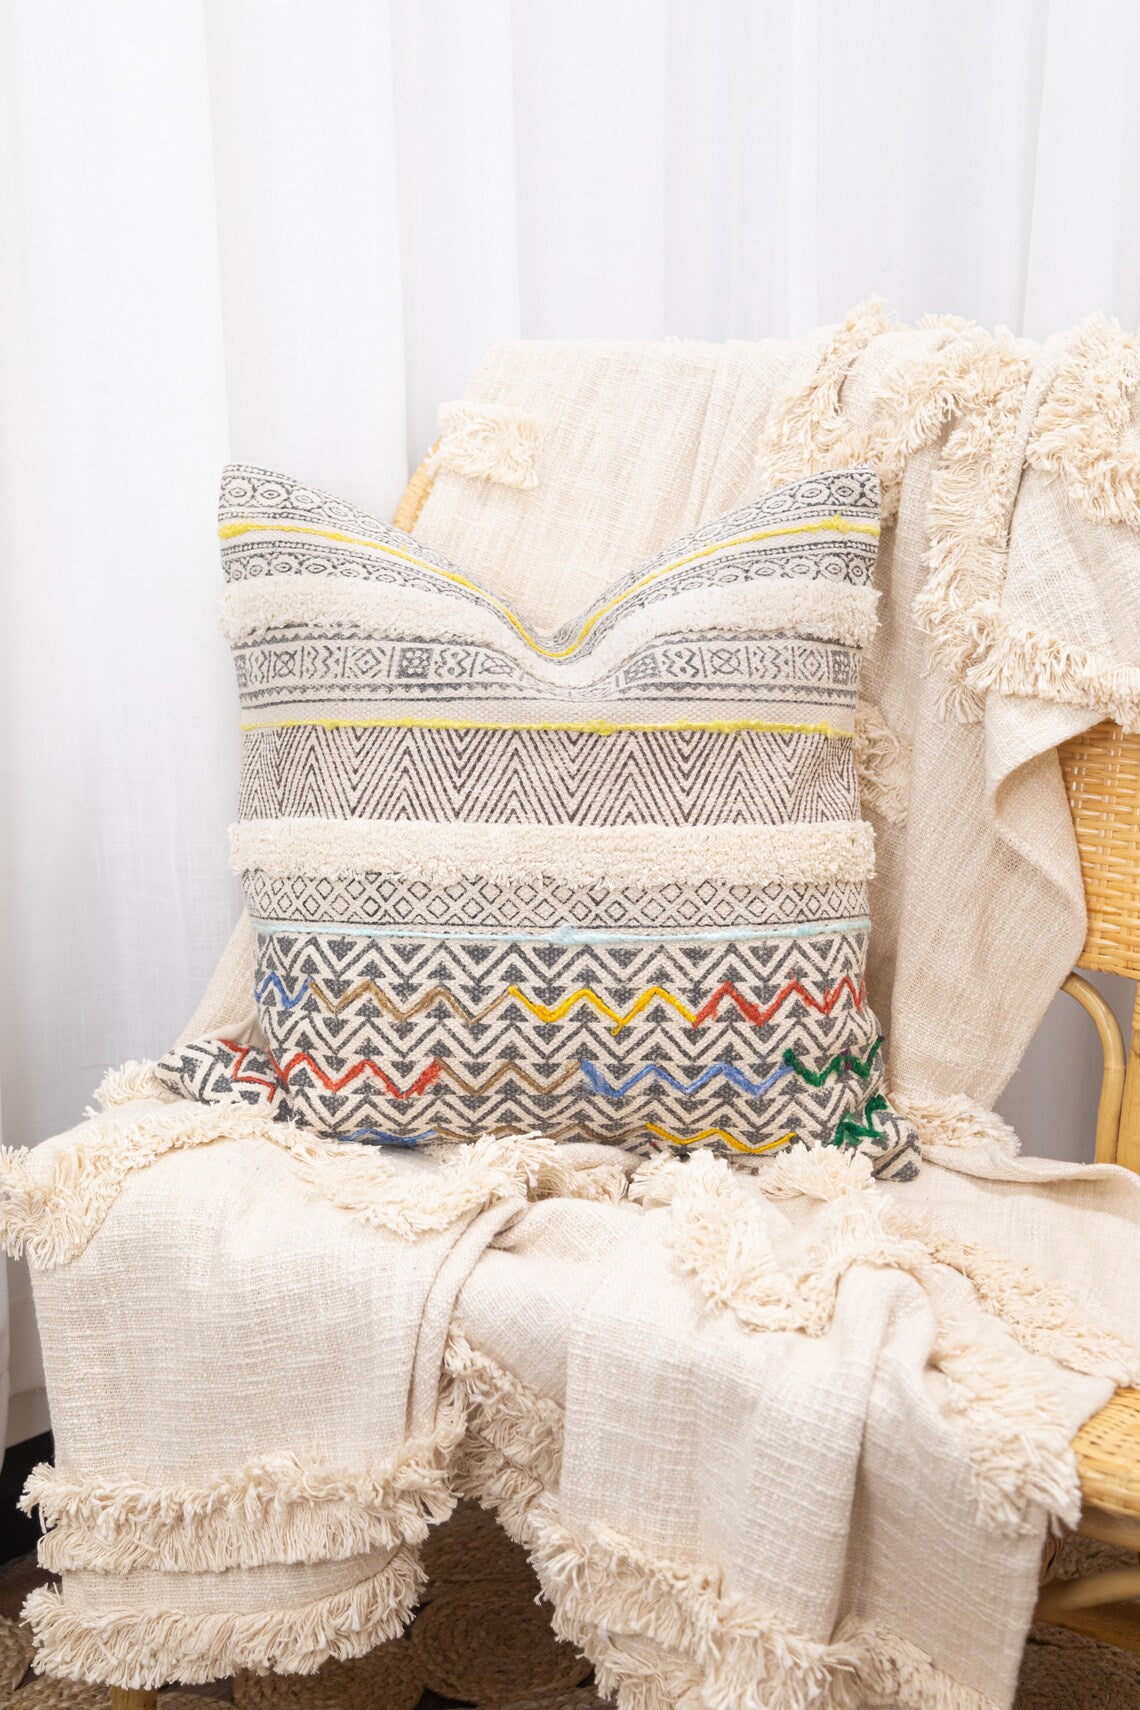 Linen Connections Tassel Hand Tufted Cushion Cover Moroccan Boho 'Shaggy' Beni Ourain Style Cushion Cover - Berber Style Cushion Cover